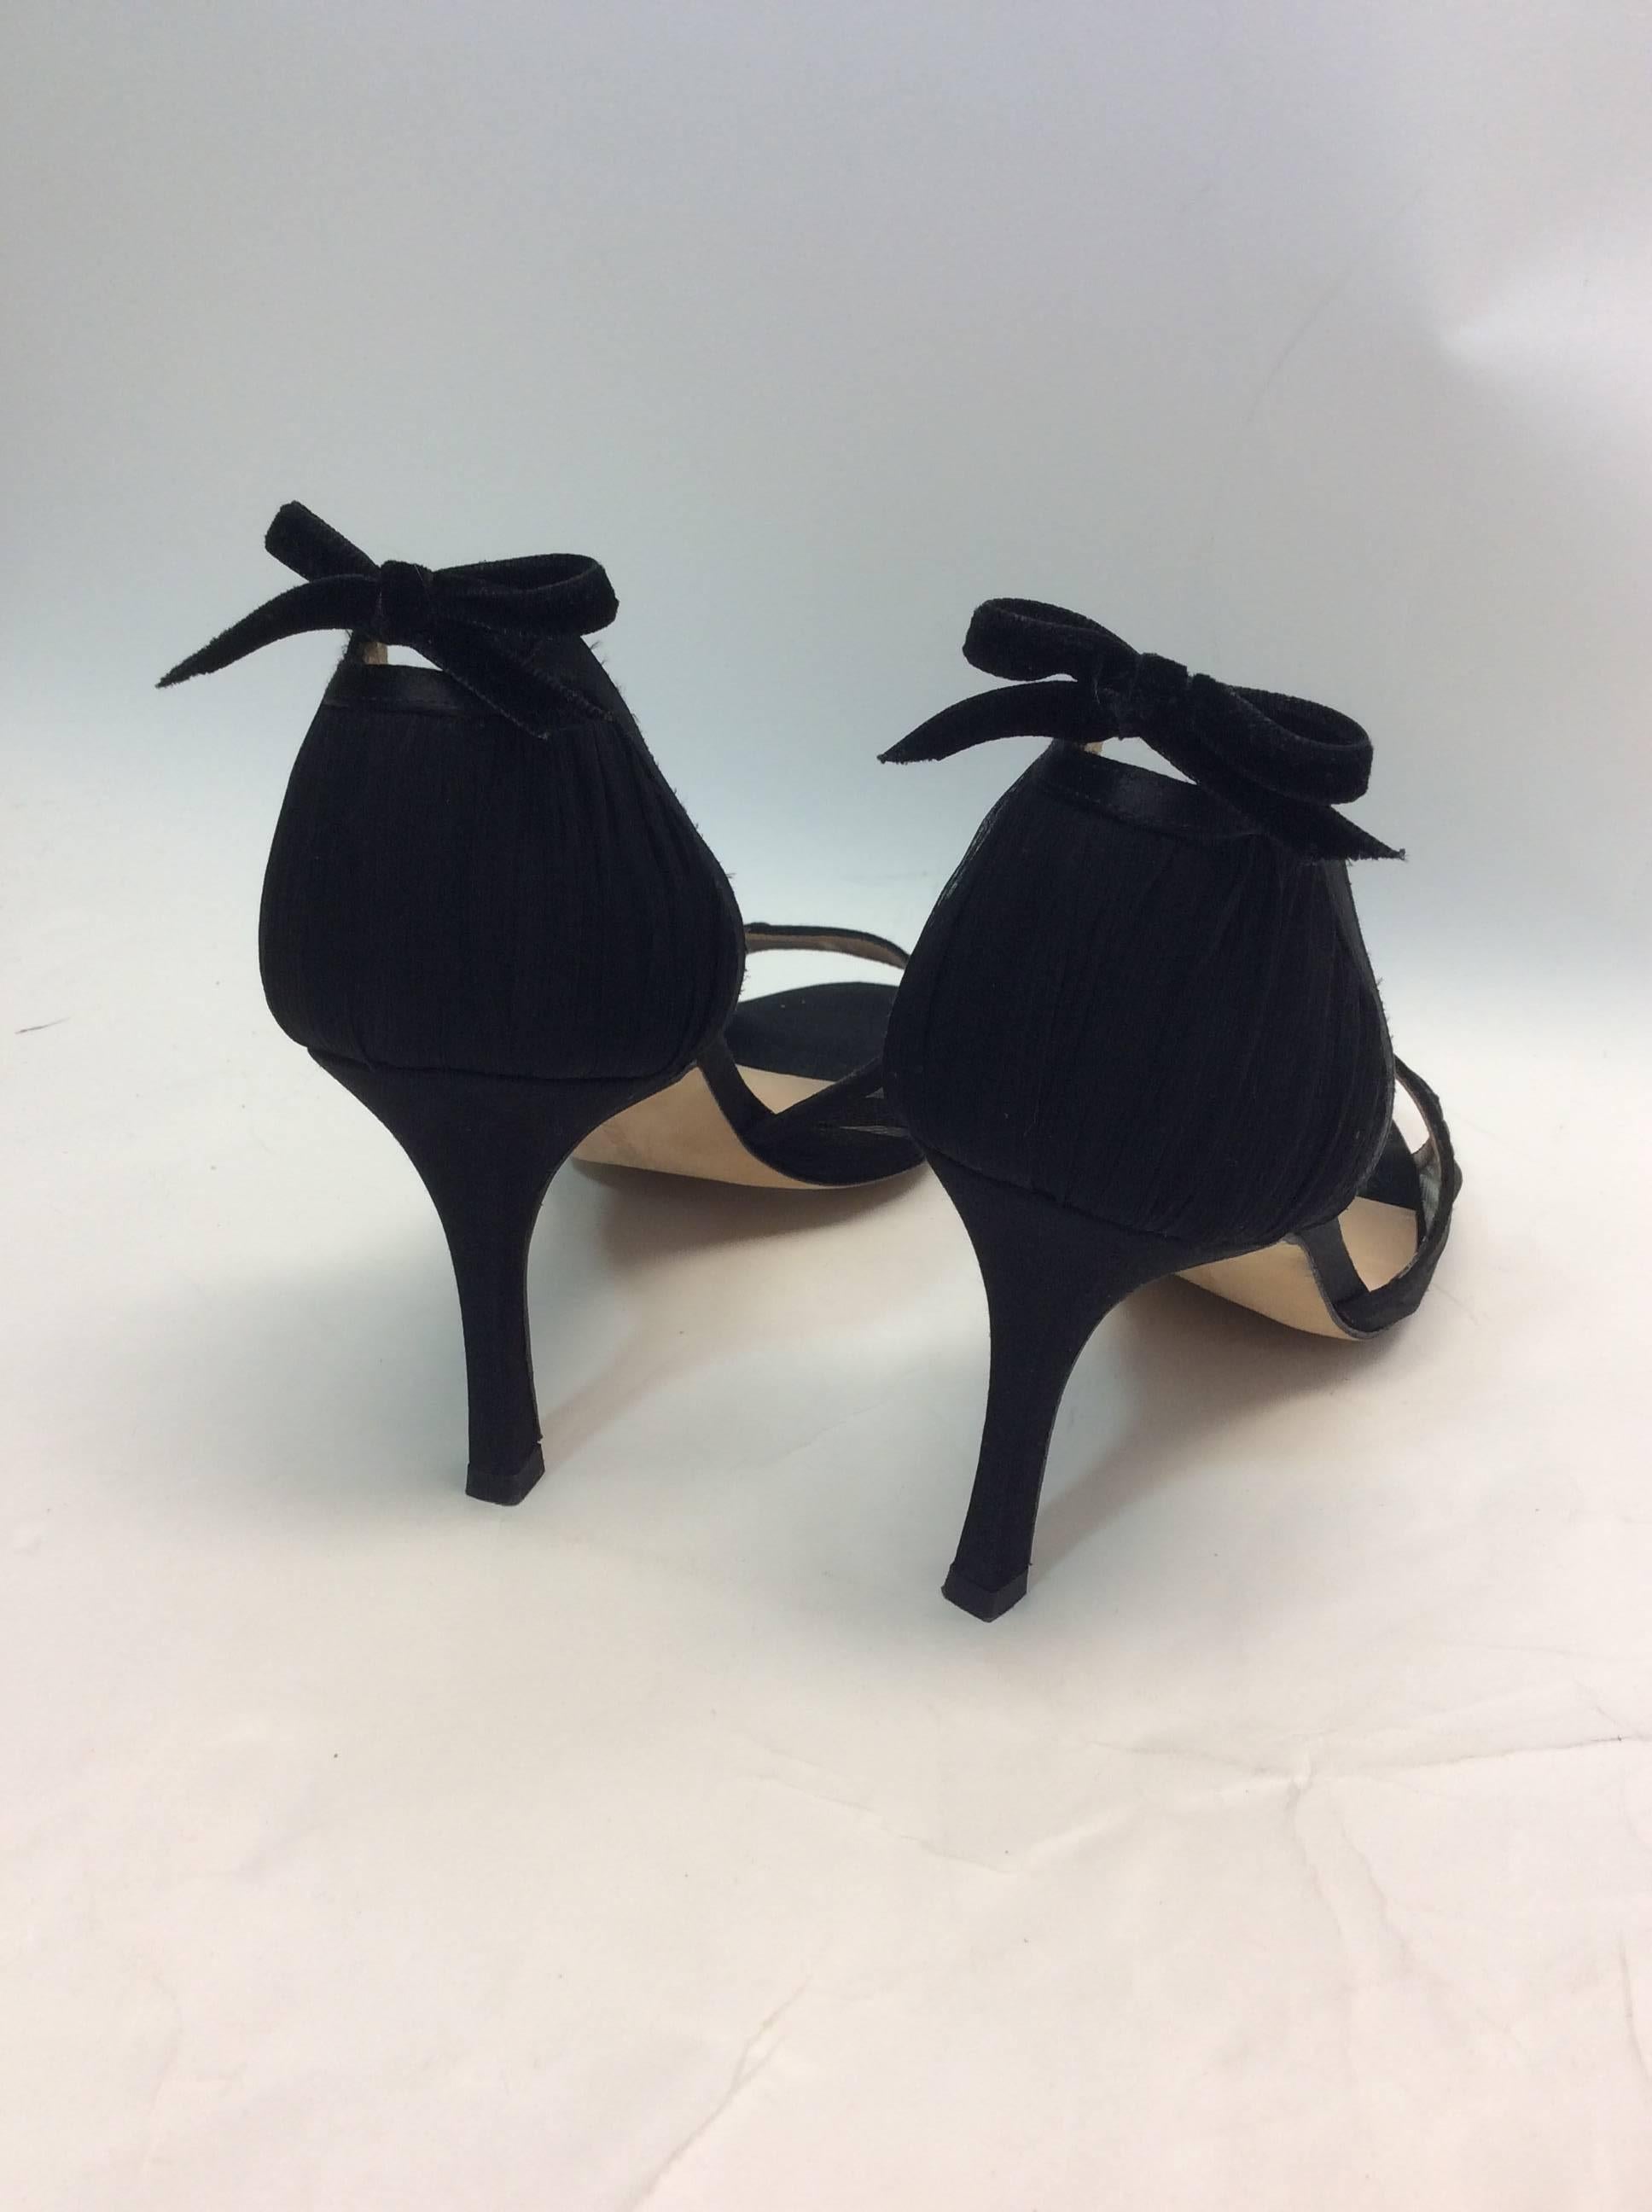 Manolo Blahnik Black Peep Toe Dress Pumps In Excellent Condition For Sale In Narberth, PA